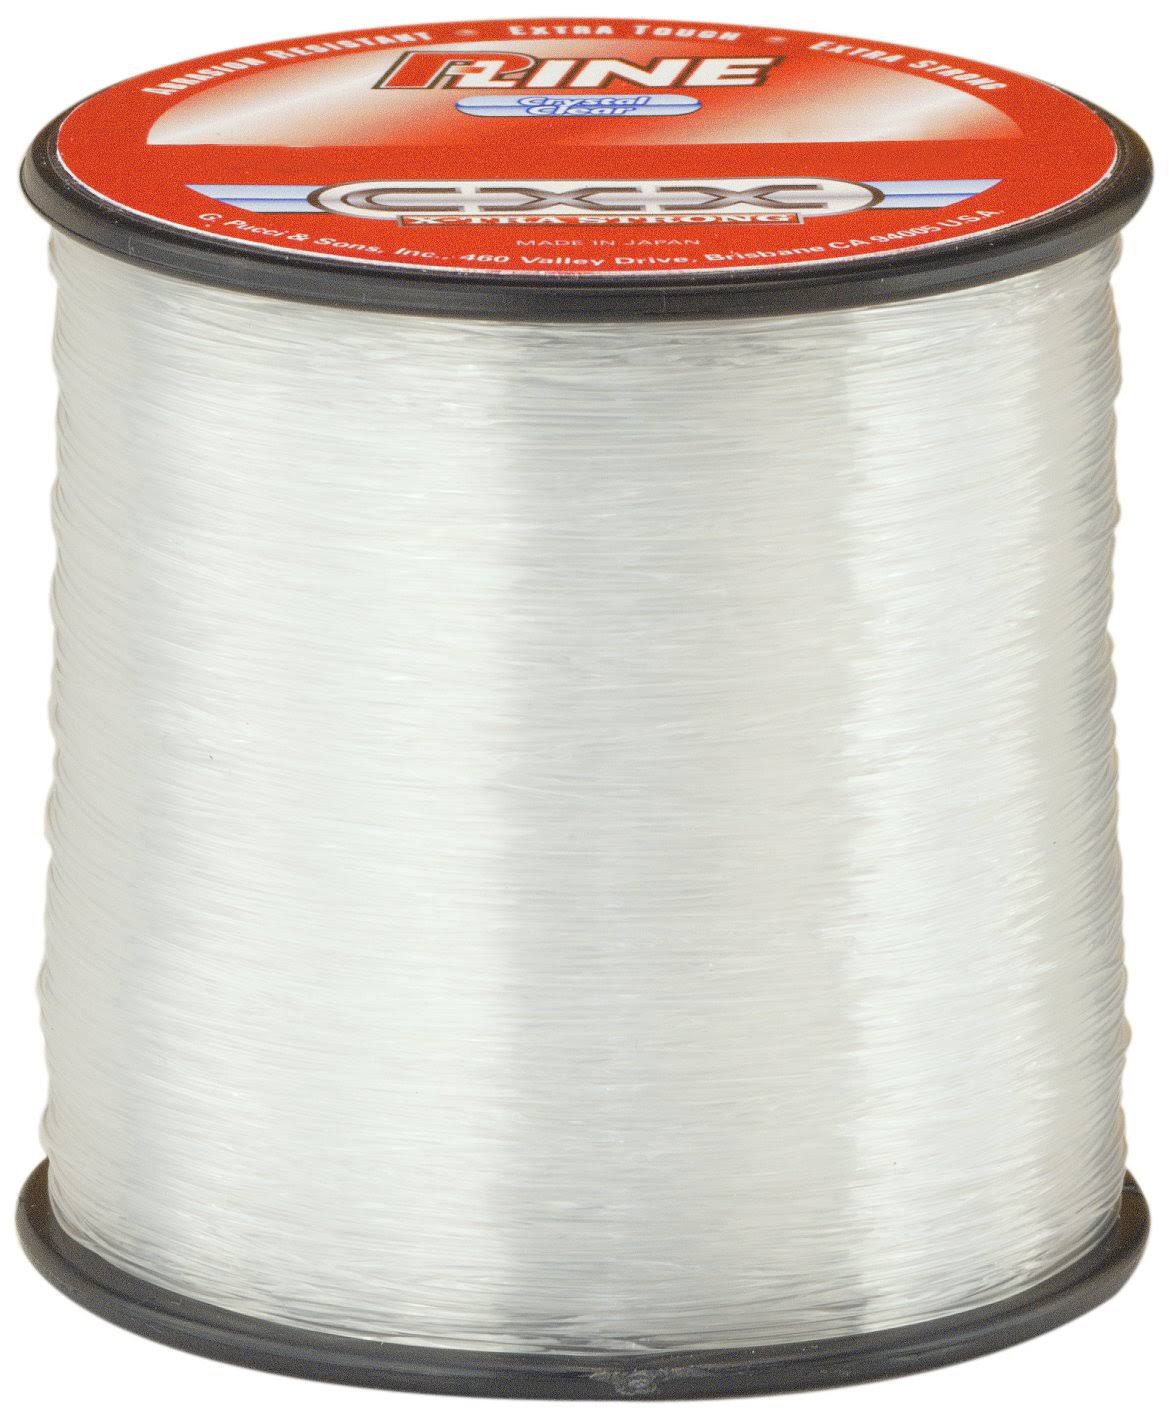 P Line CXX Xtra Strong Fishing Spool - Crystal Clear, 600yds